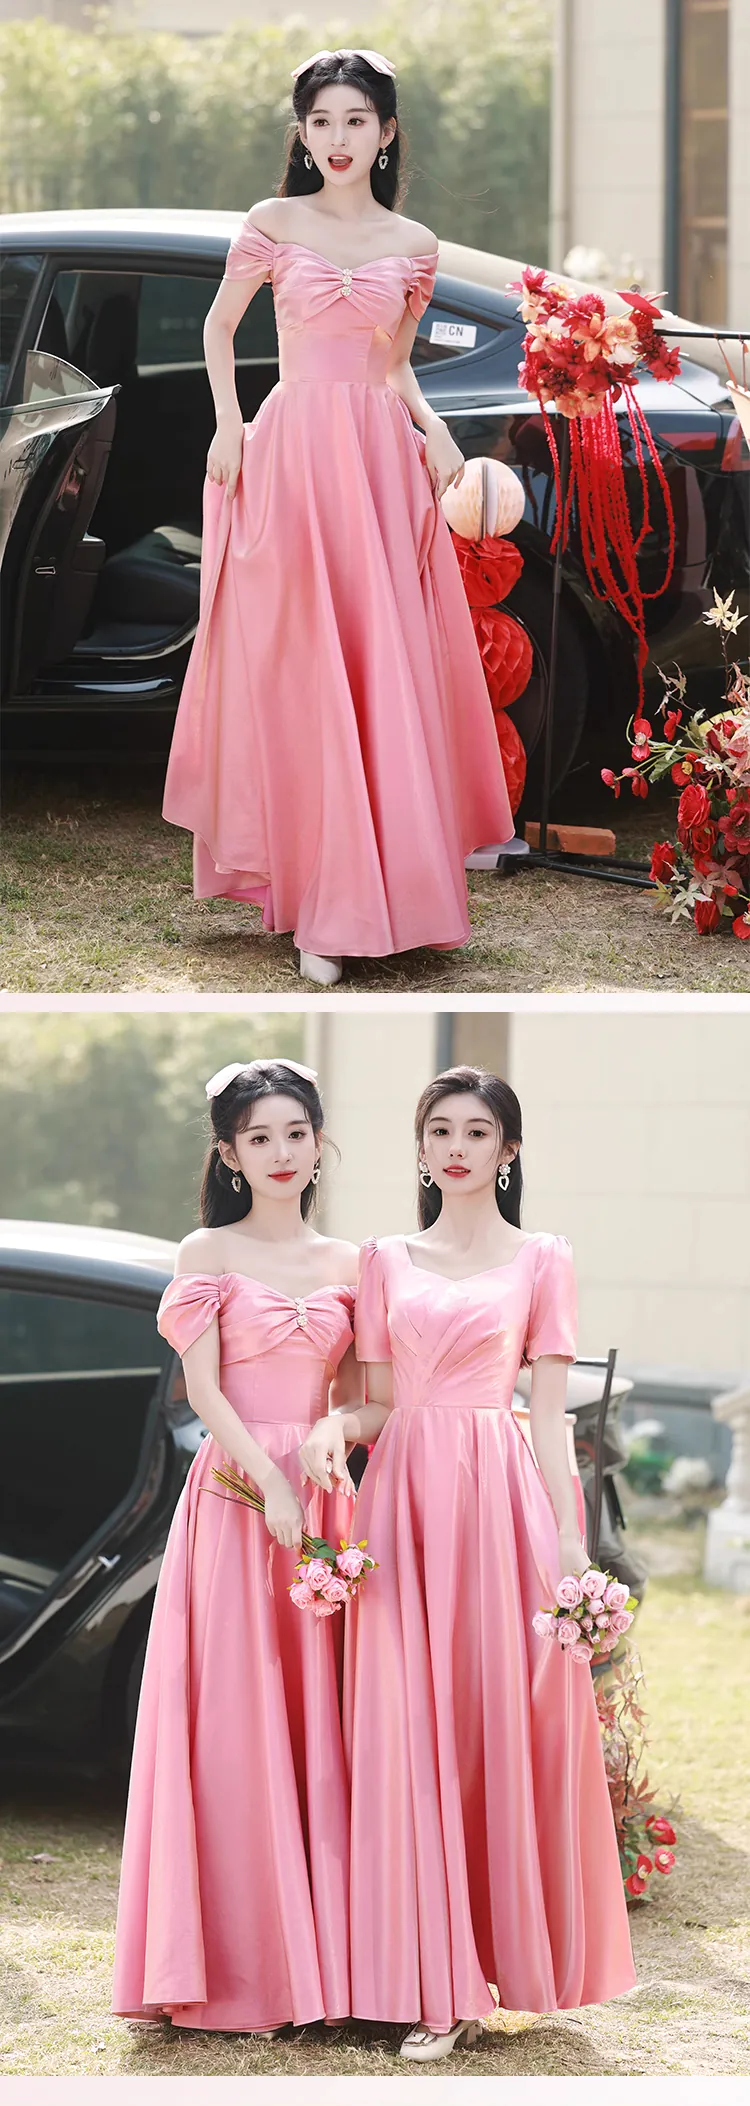 Charming-Pink-Satin-Bridesmaid-Dress-Short-Sleeve-Prom-Evening-Gown17